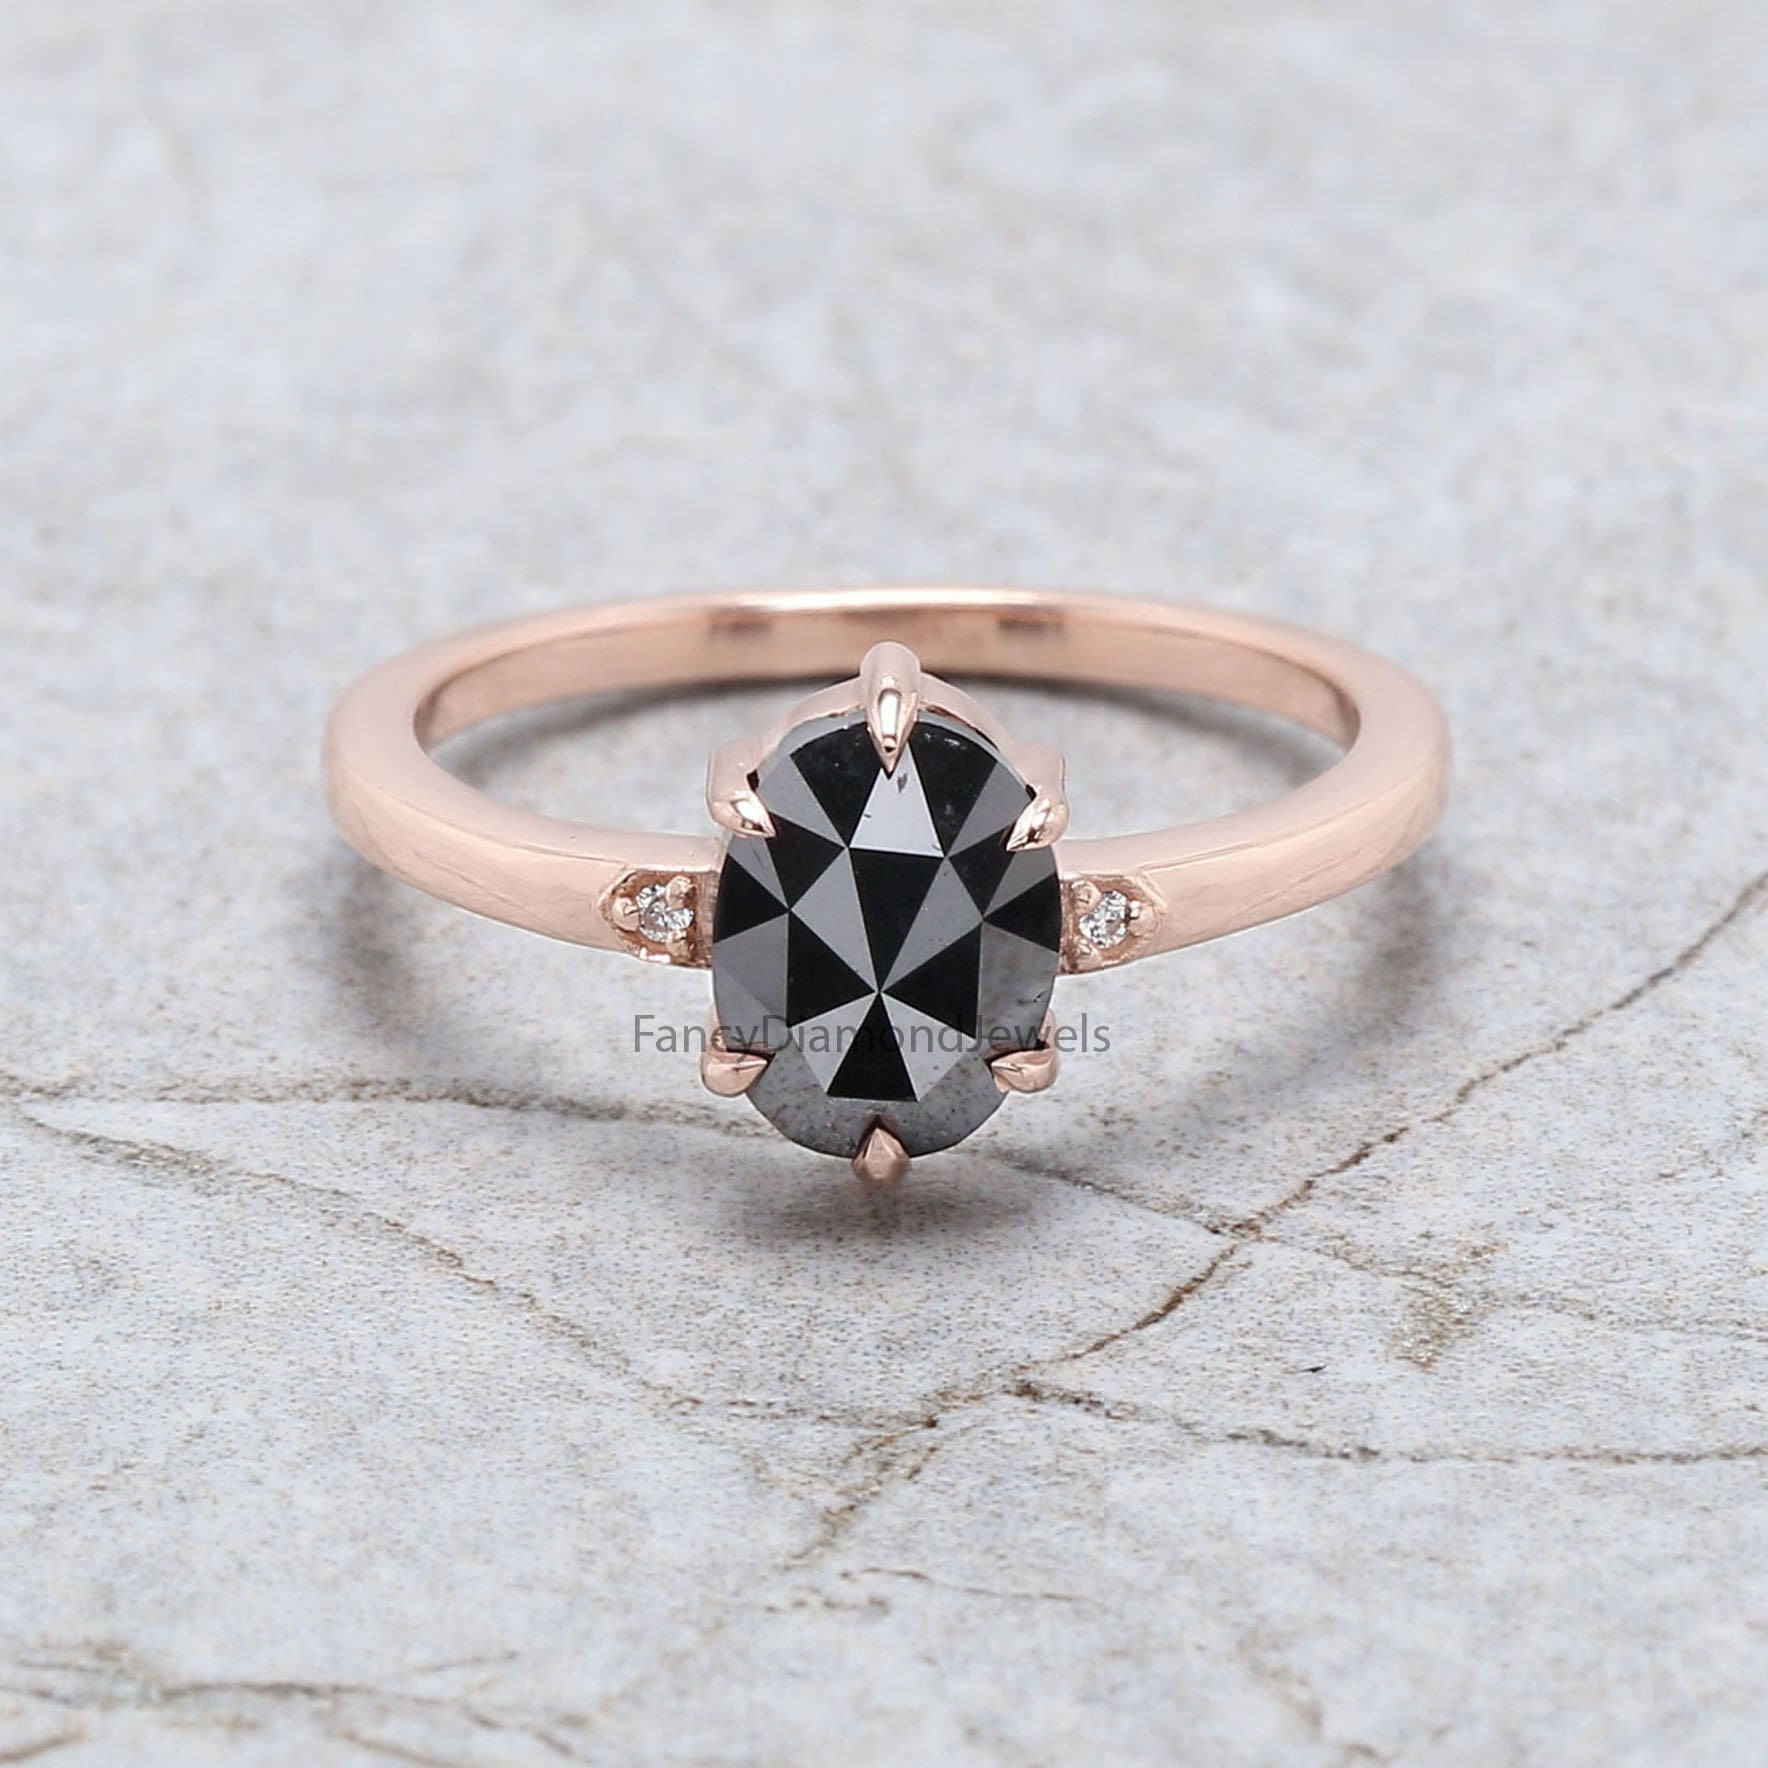 Oval Cut Black Color Diamond Ring 1.14 Ct 7.71 MM Oval Shape Diamond Ring 14K Solid Rose Gold Silver Oval Engagement Ring Gift For Her QN1976